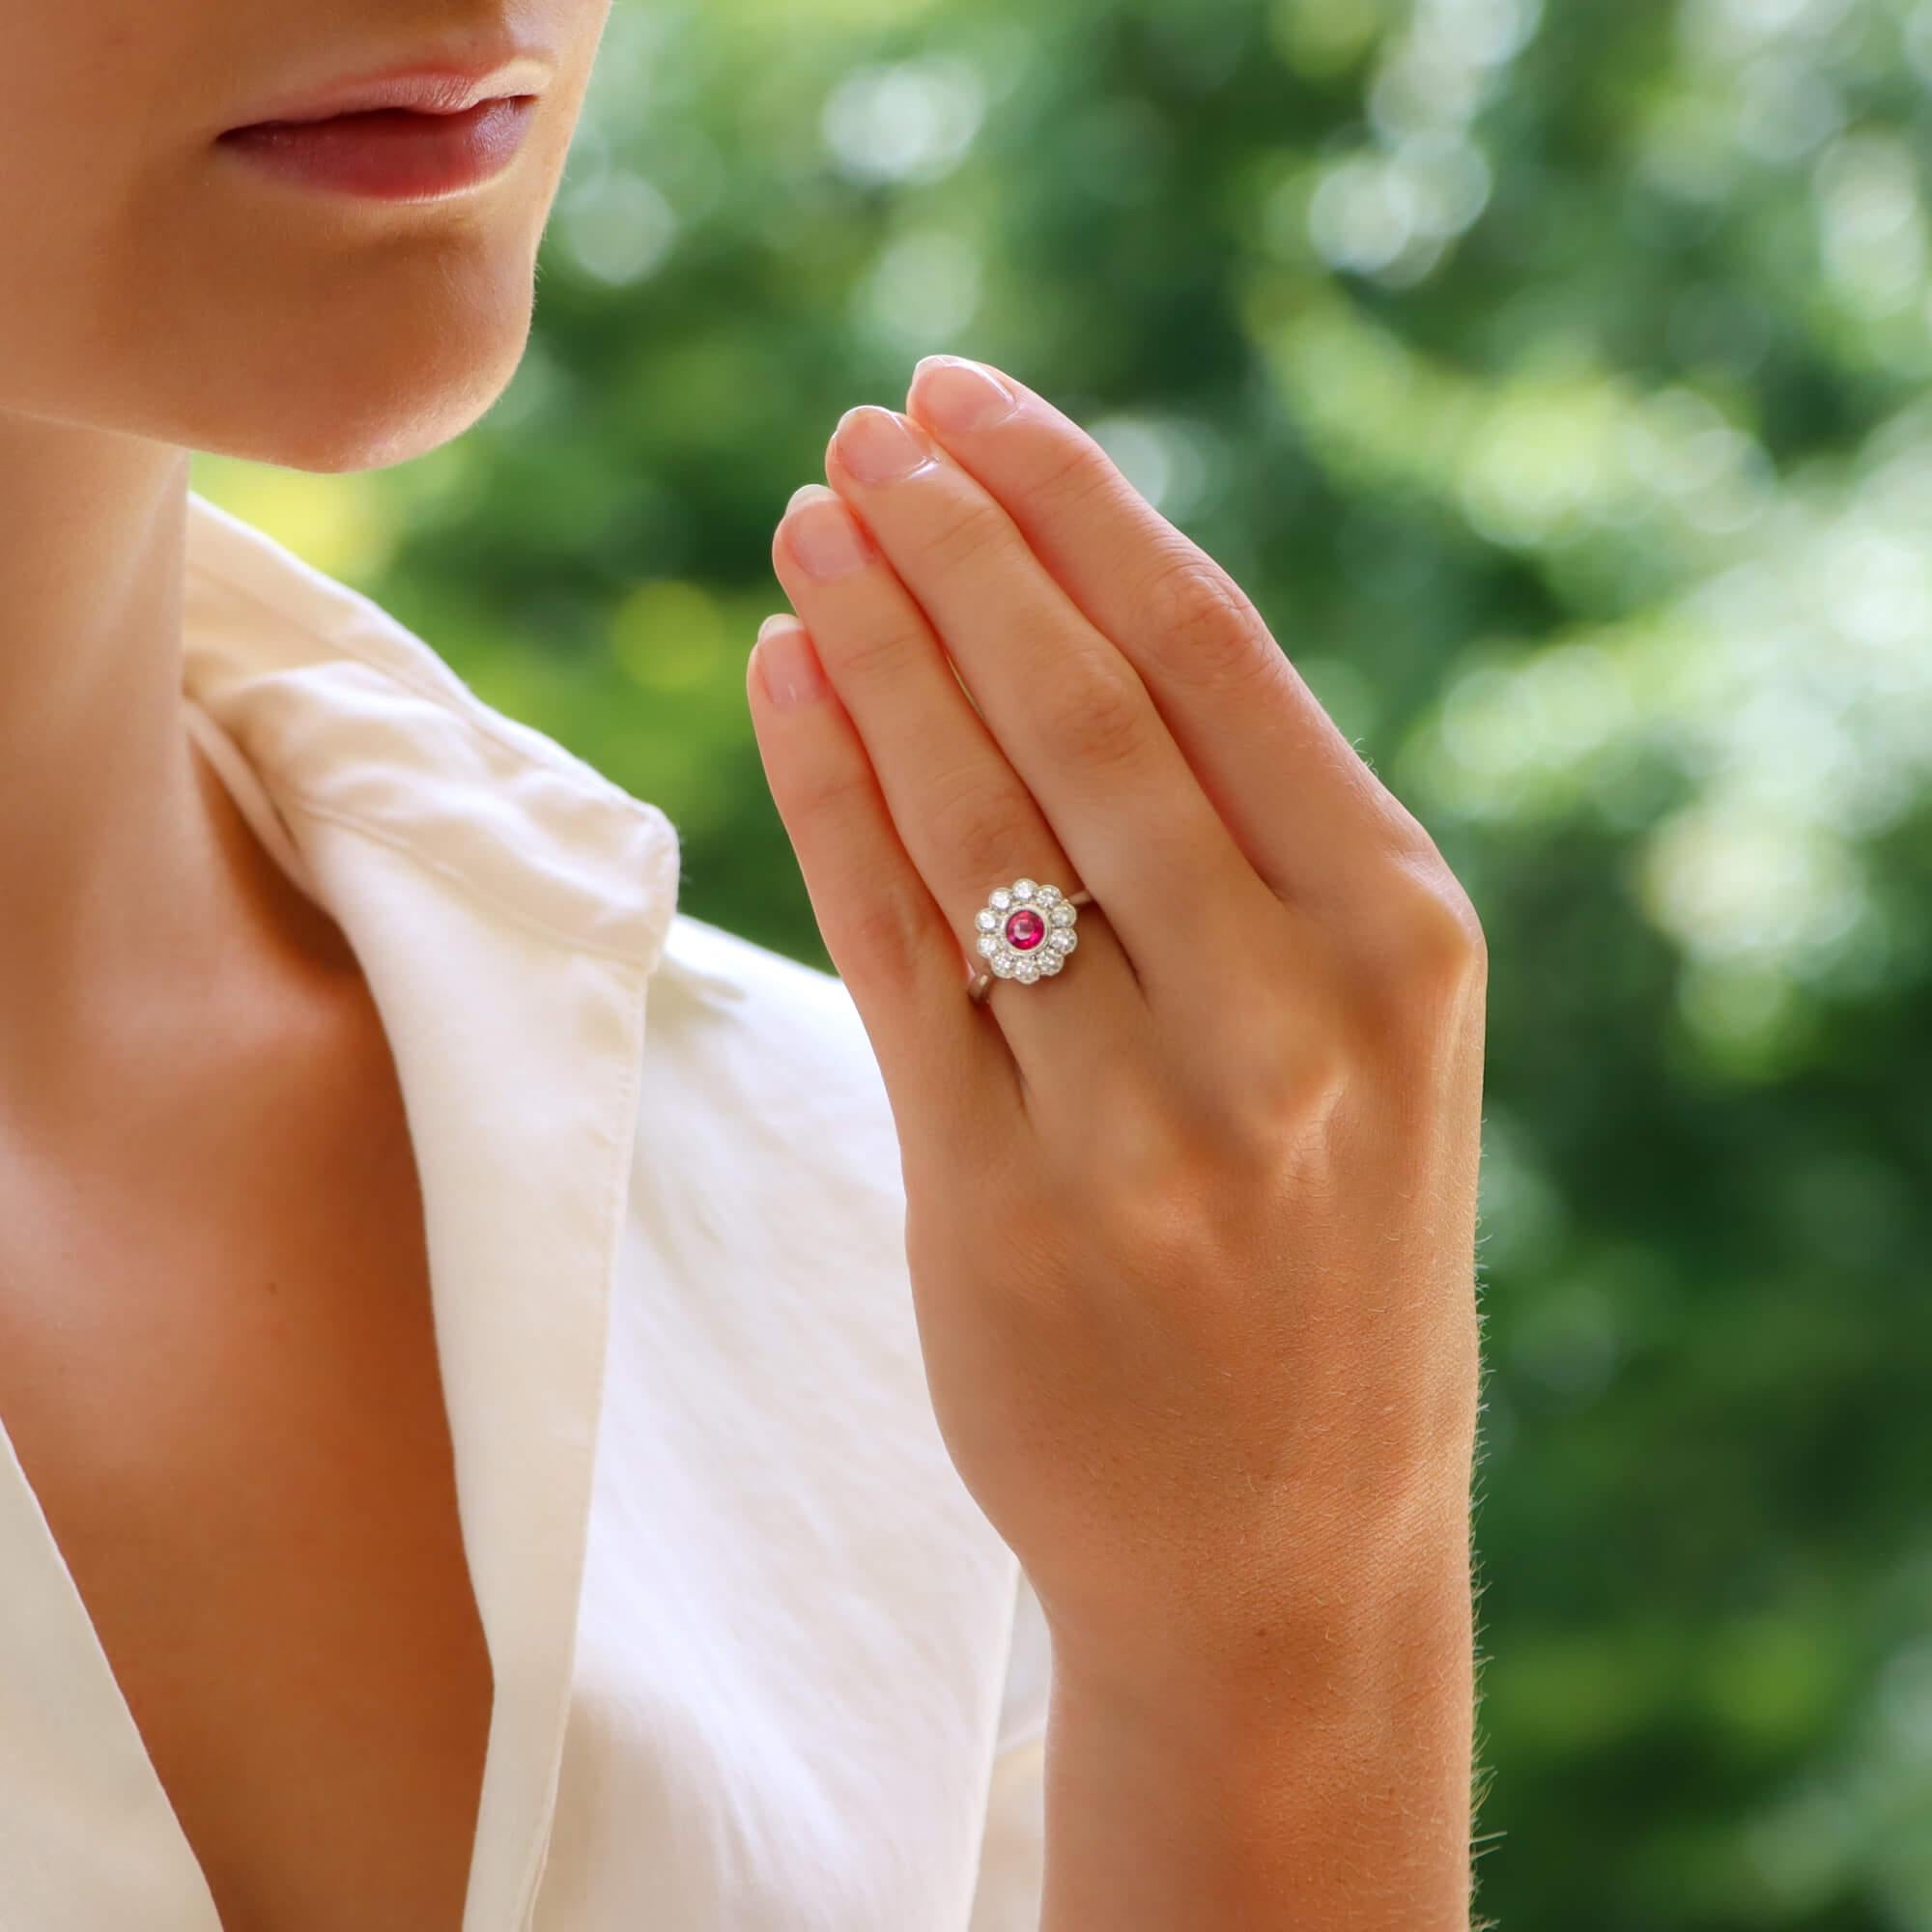 A beautiful ruby and diamond engagement/cocktail cluster ring set in 18k white gold. 

The ring is predominantly set with a vibrant round cut pinkish ruby which is rub-over set to centre. Surrounding the ruby is then a cluster of ten sparkly round